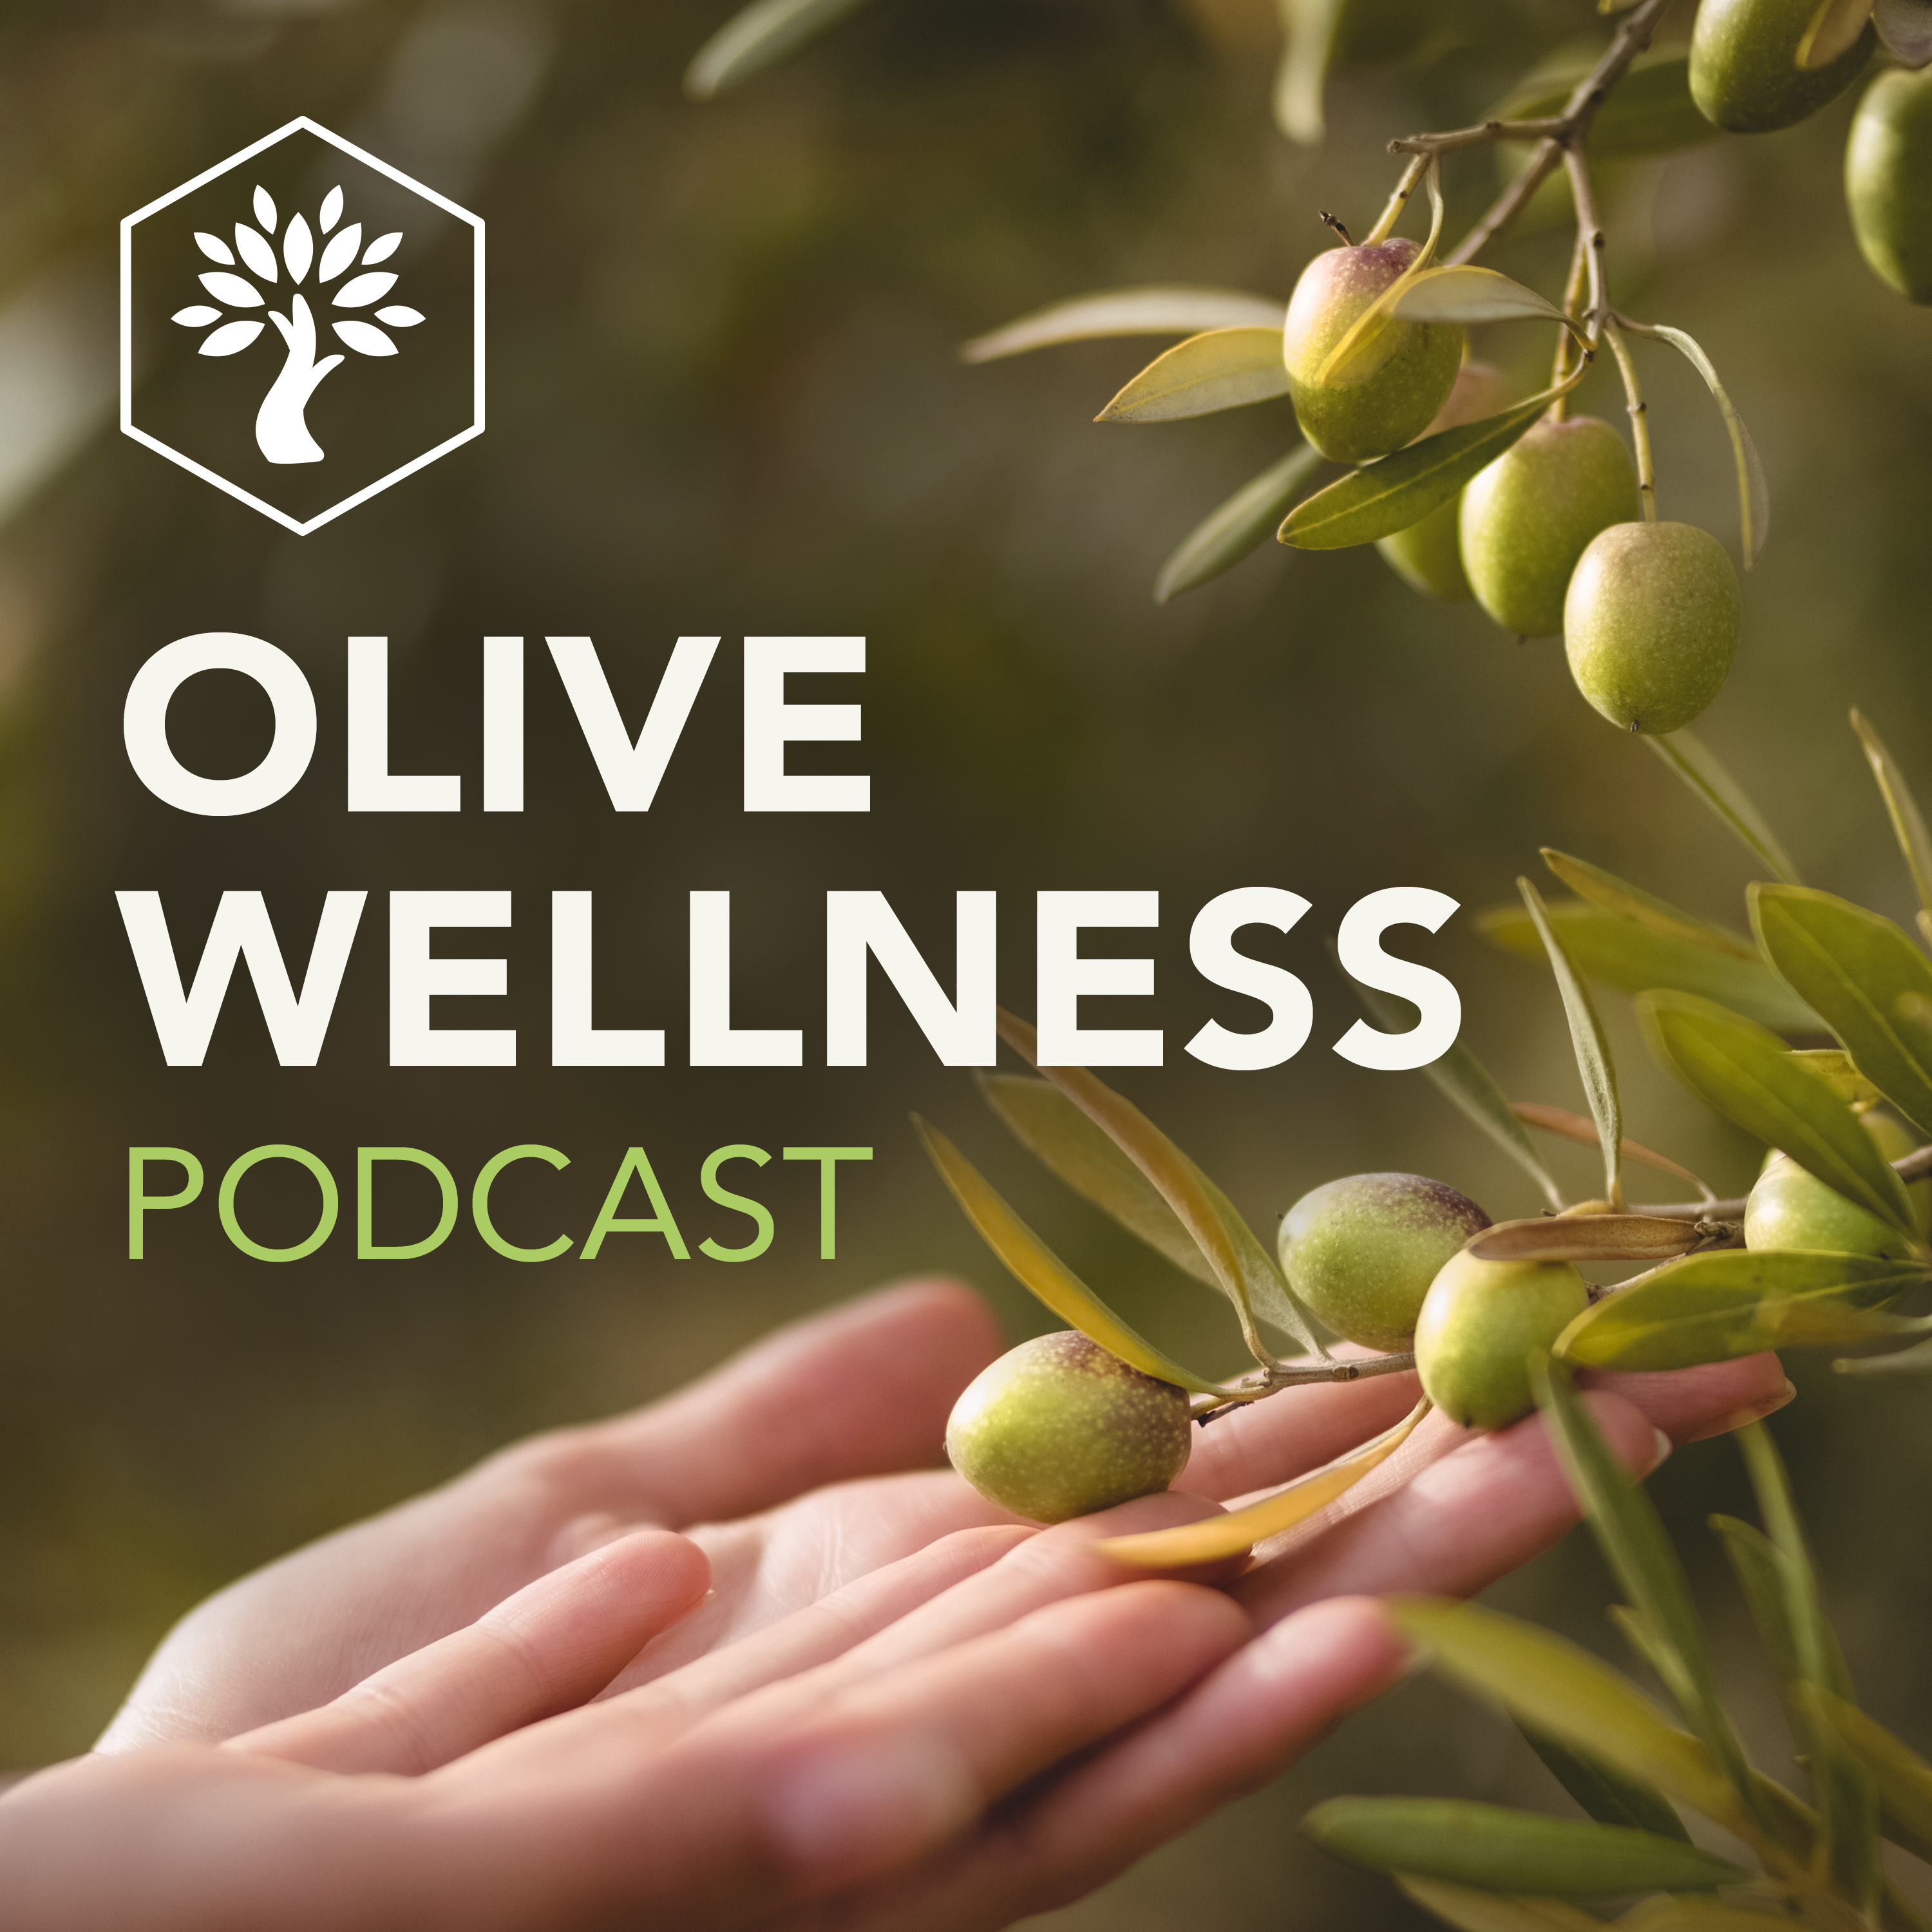 A taste for olive oil – and its health benefits